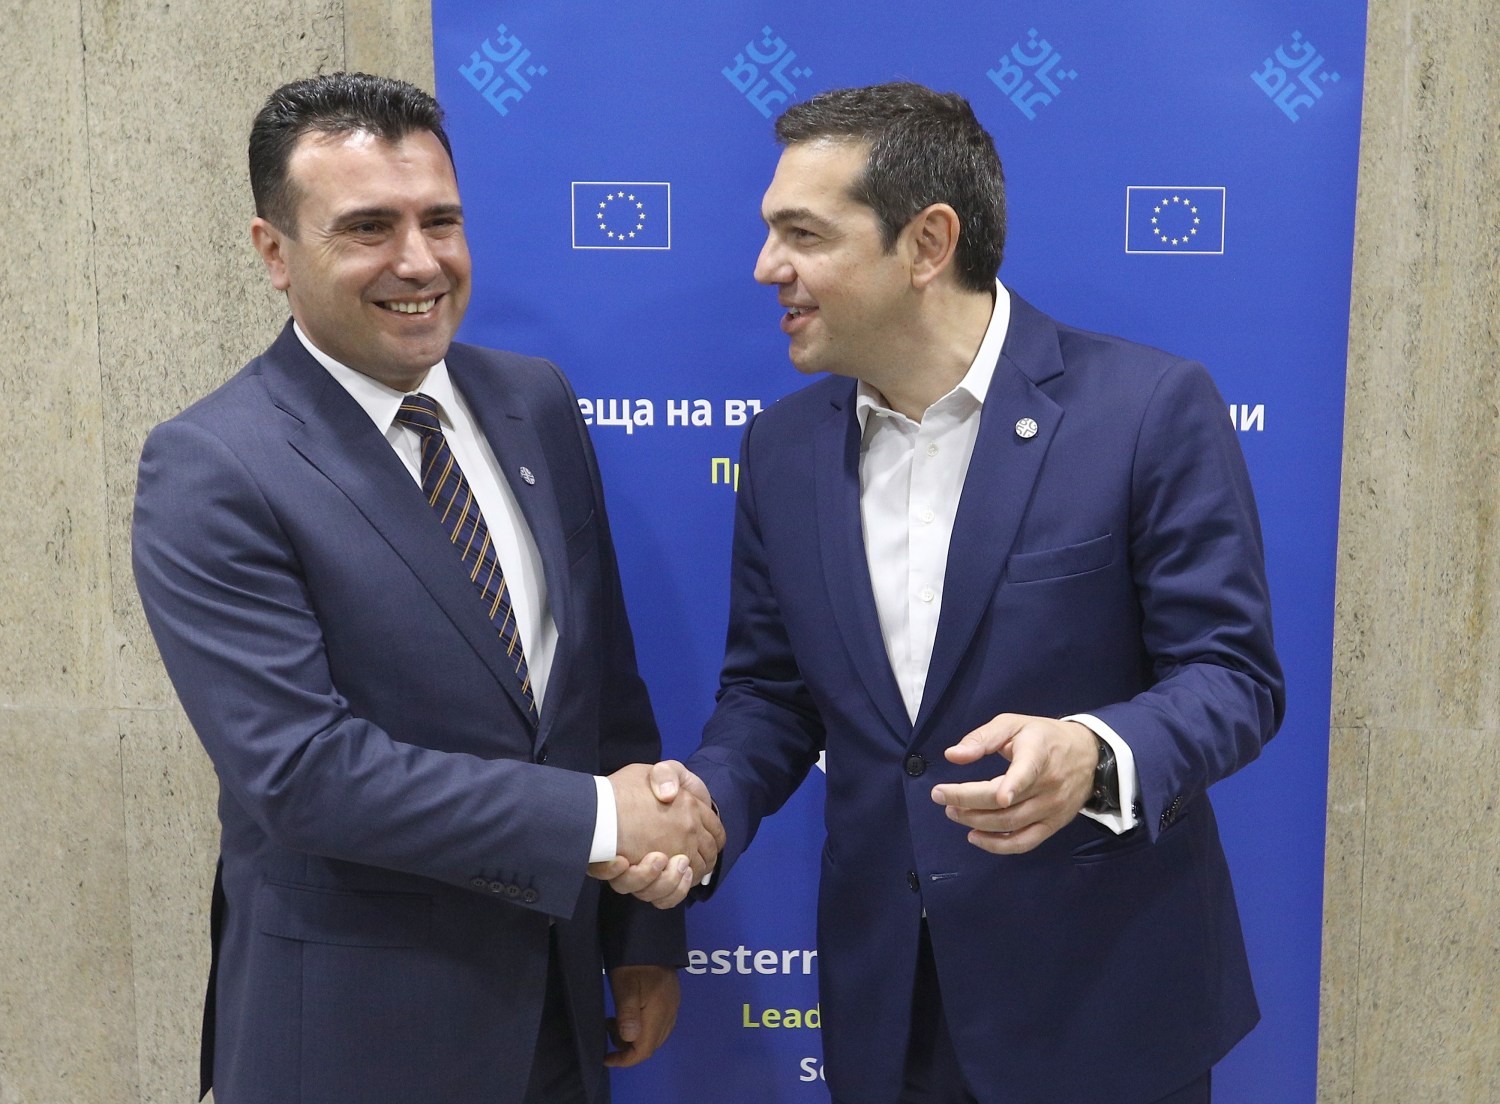 Greek Prime Minister Alexis Tsipras meets with Macedonian Prime Minister Zoran Zaev at the EU-Western Balkans Summit in Sofia, Bulgaria, May 17, 2018. REUTERS/Stoyan Nenov - UP1EE5H0MEVGG